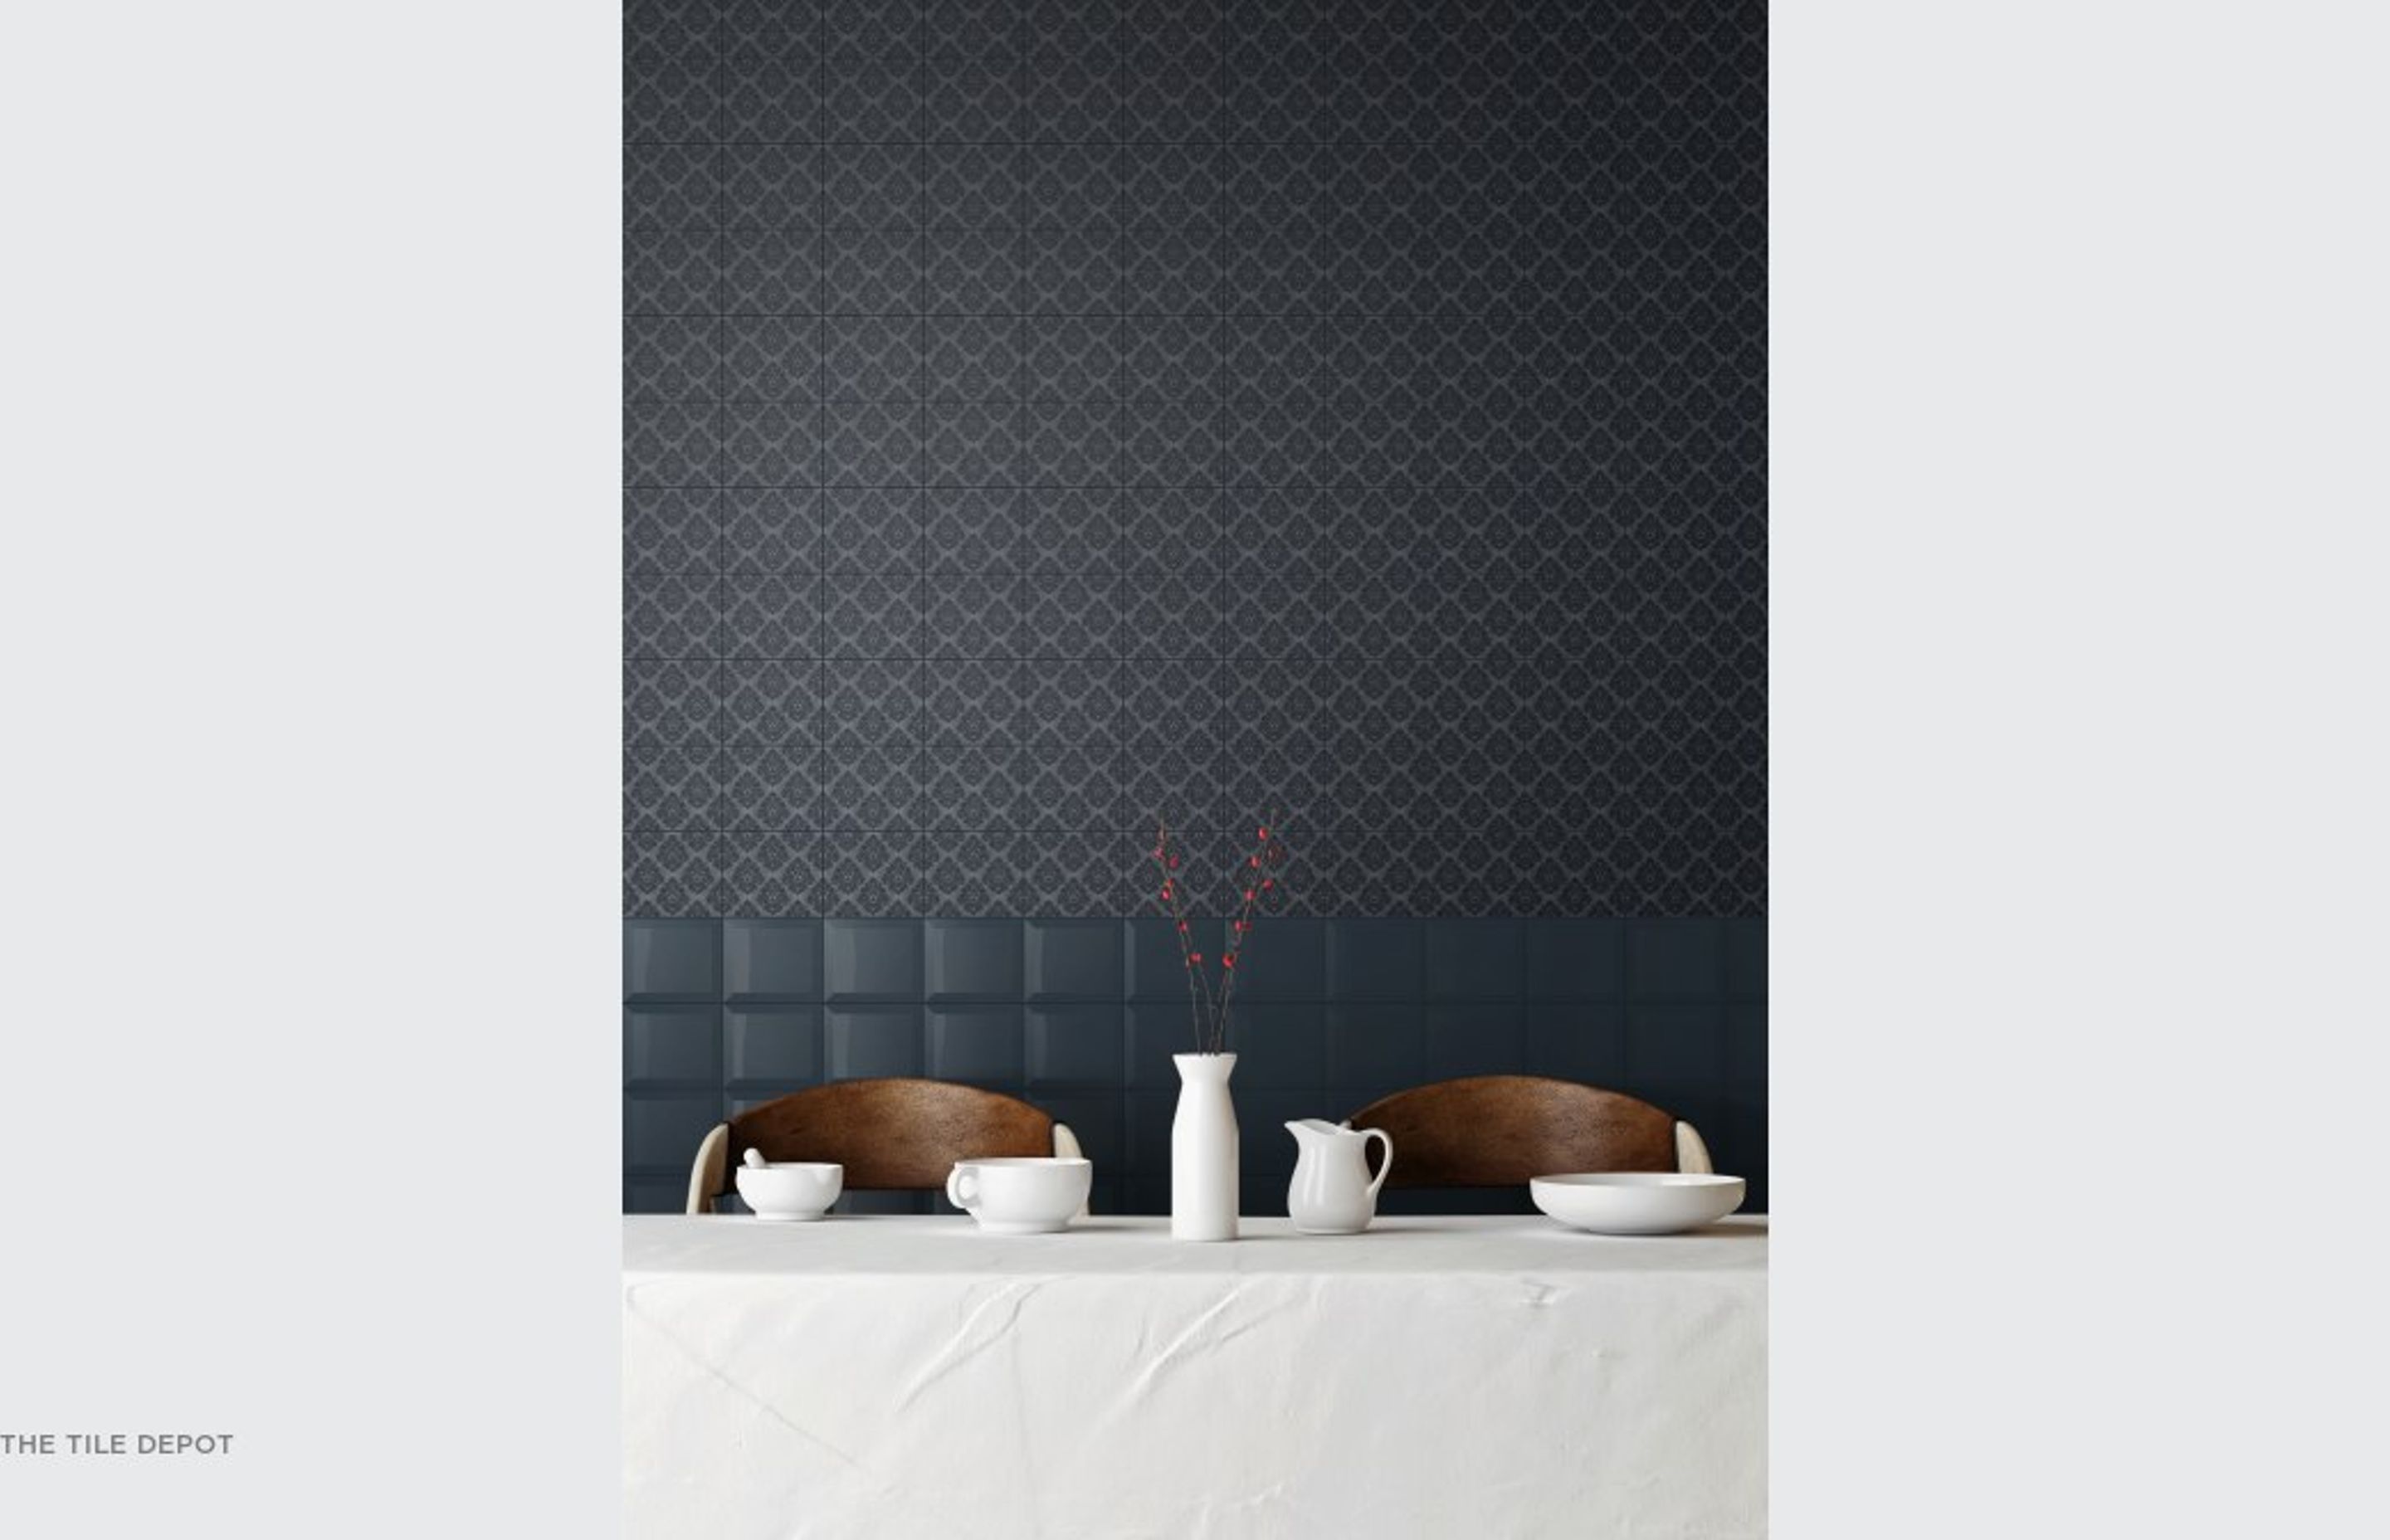 Two different types of tiles are used to create this feature wall. The tiles are glazed ceramic with a satin finish which makes them look almost like a wall paper. This bold feature wall adds a sense of modern sophistication to the space and come from the